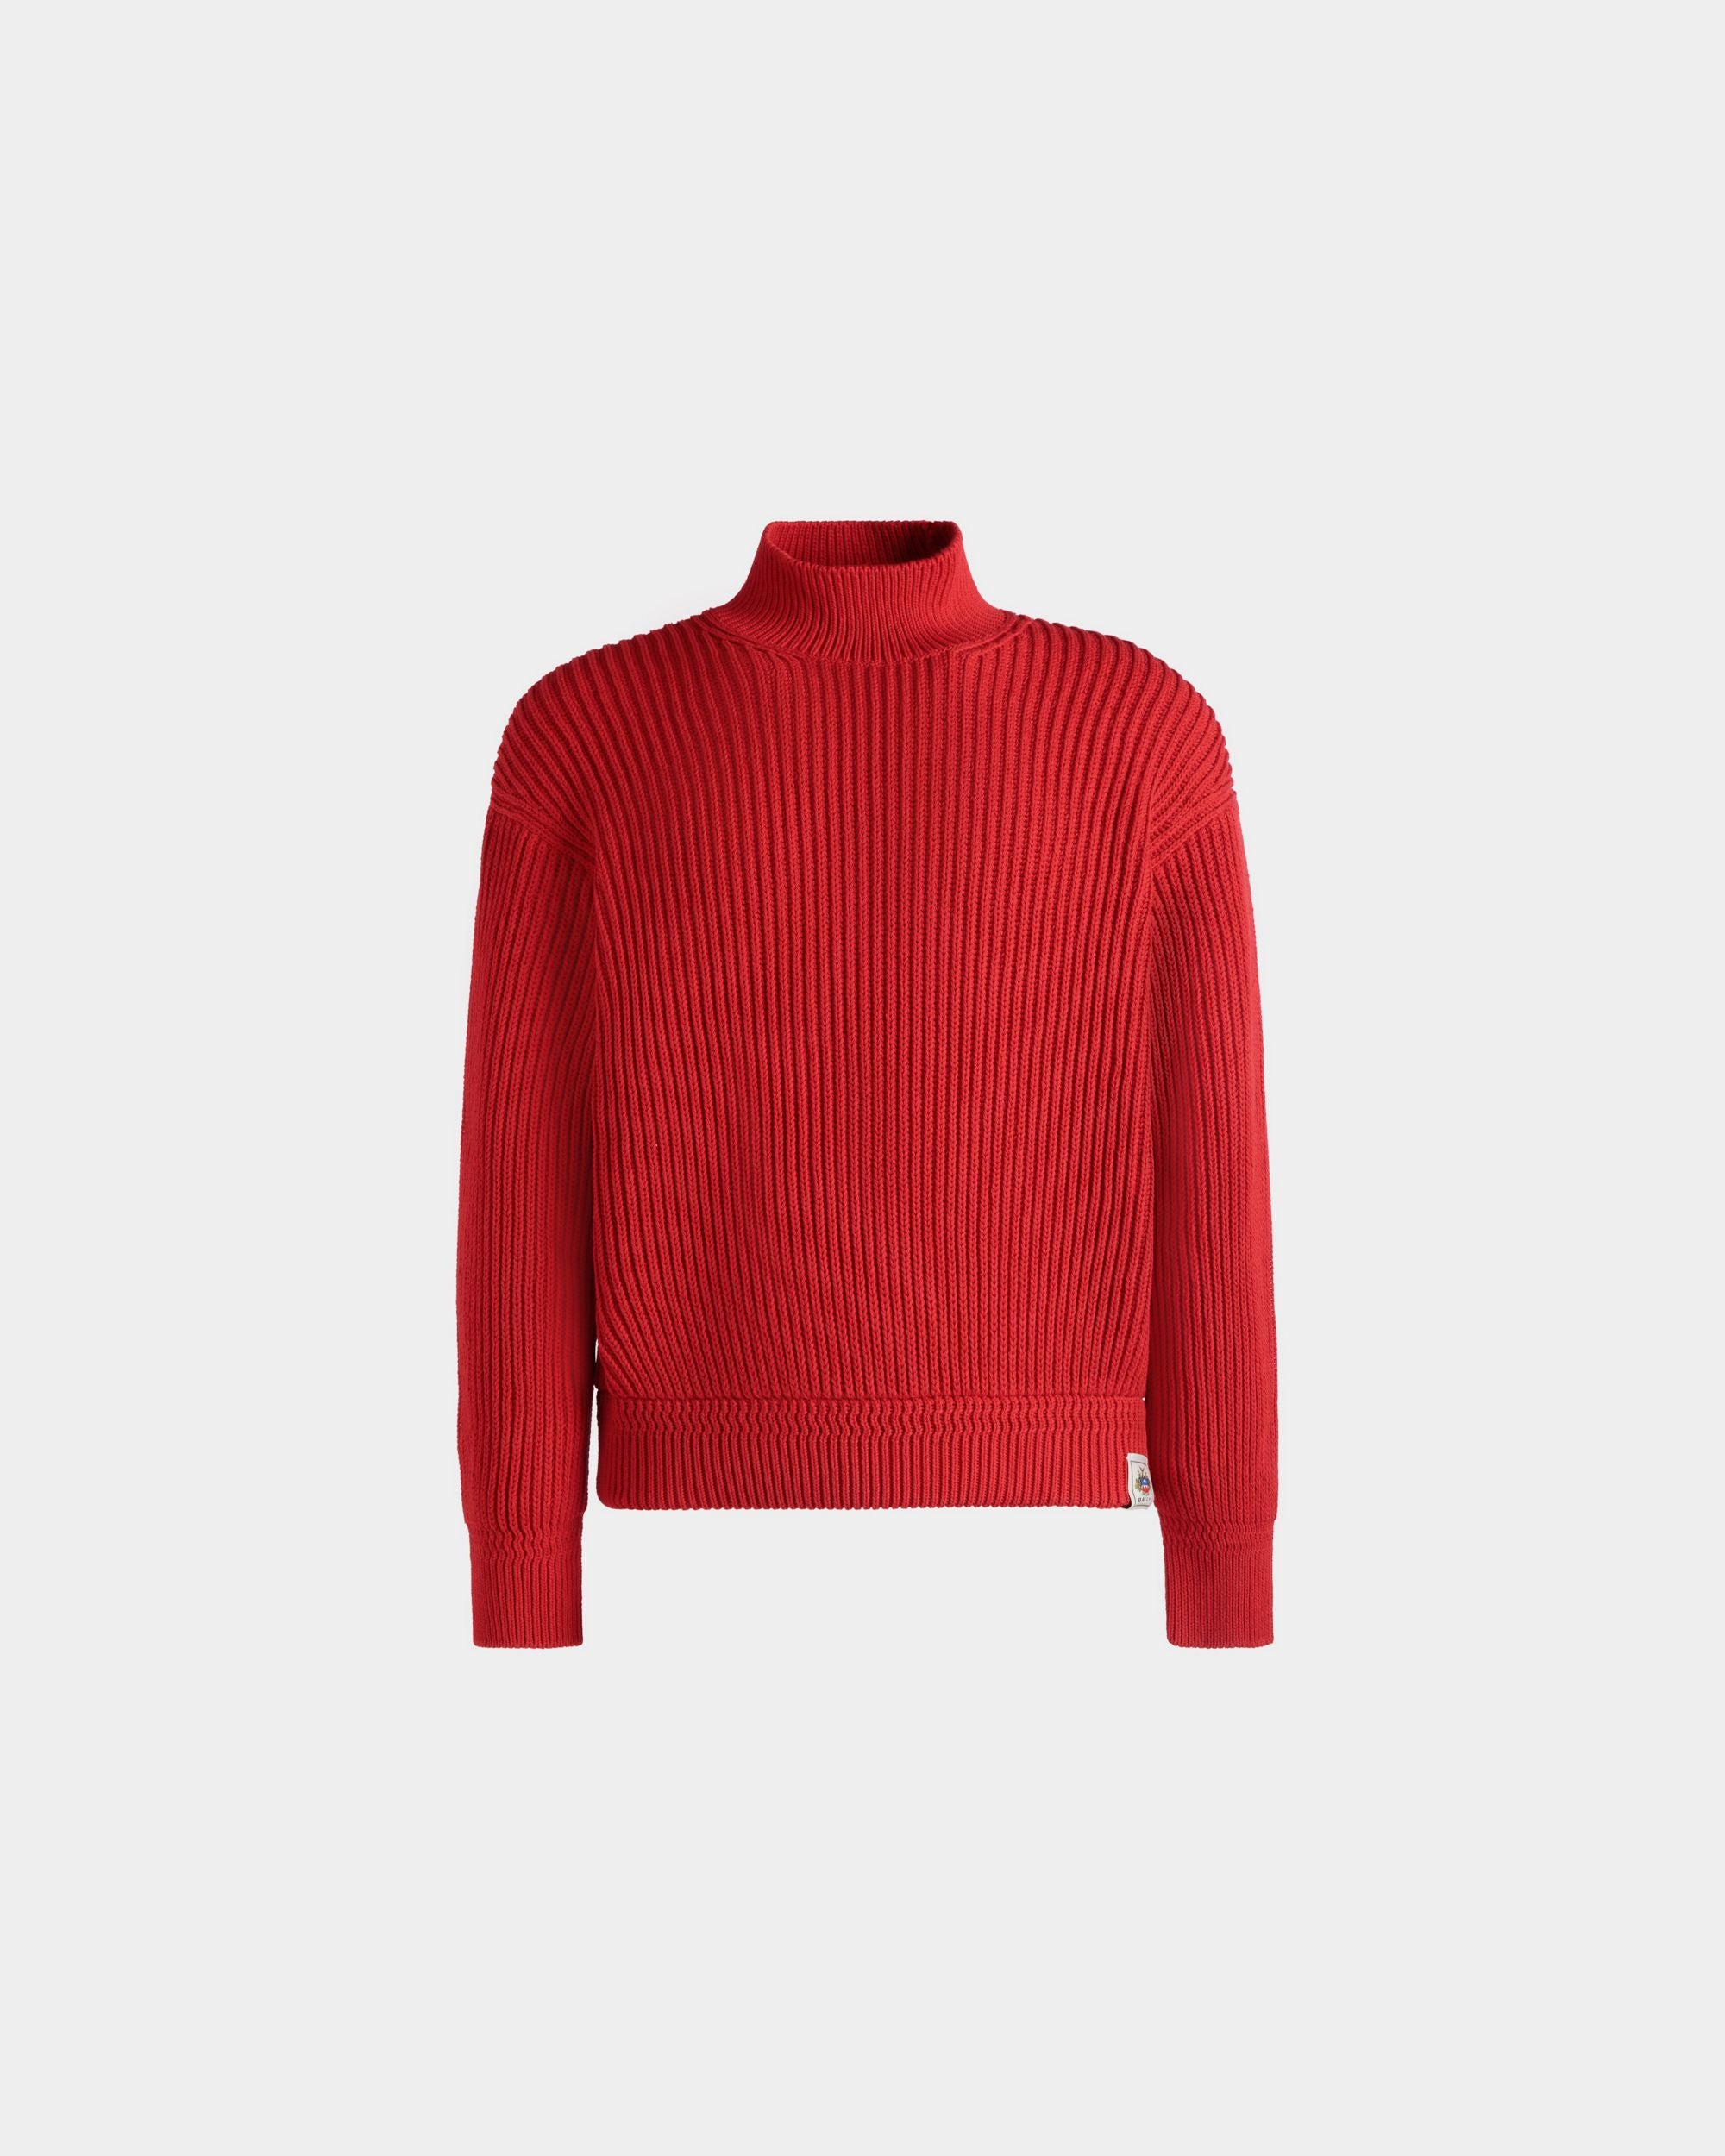 Men's Roll Neck in Candy Red Cotton | Bally | Still Life Front